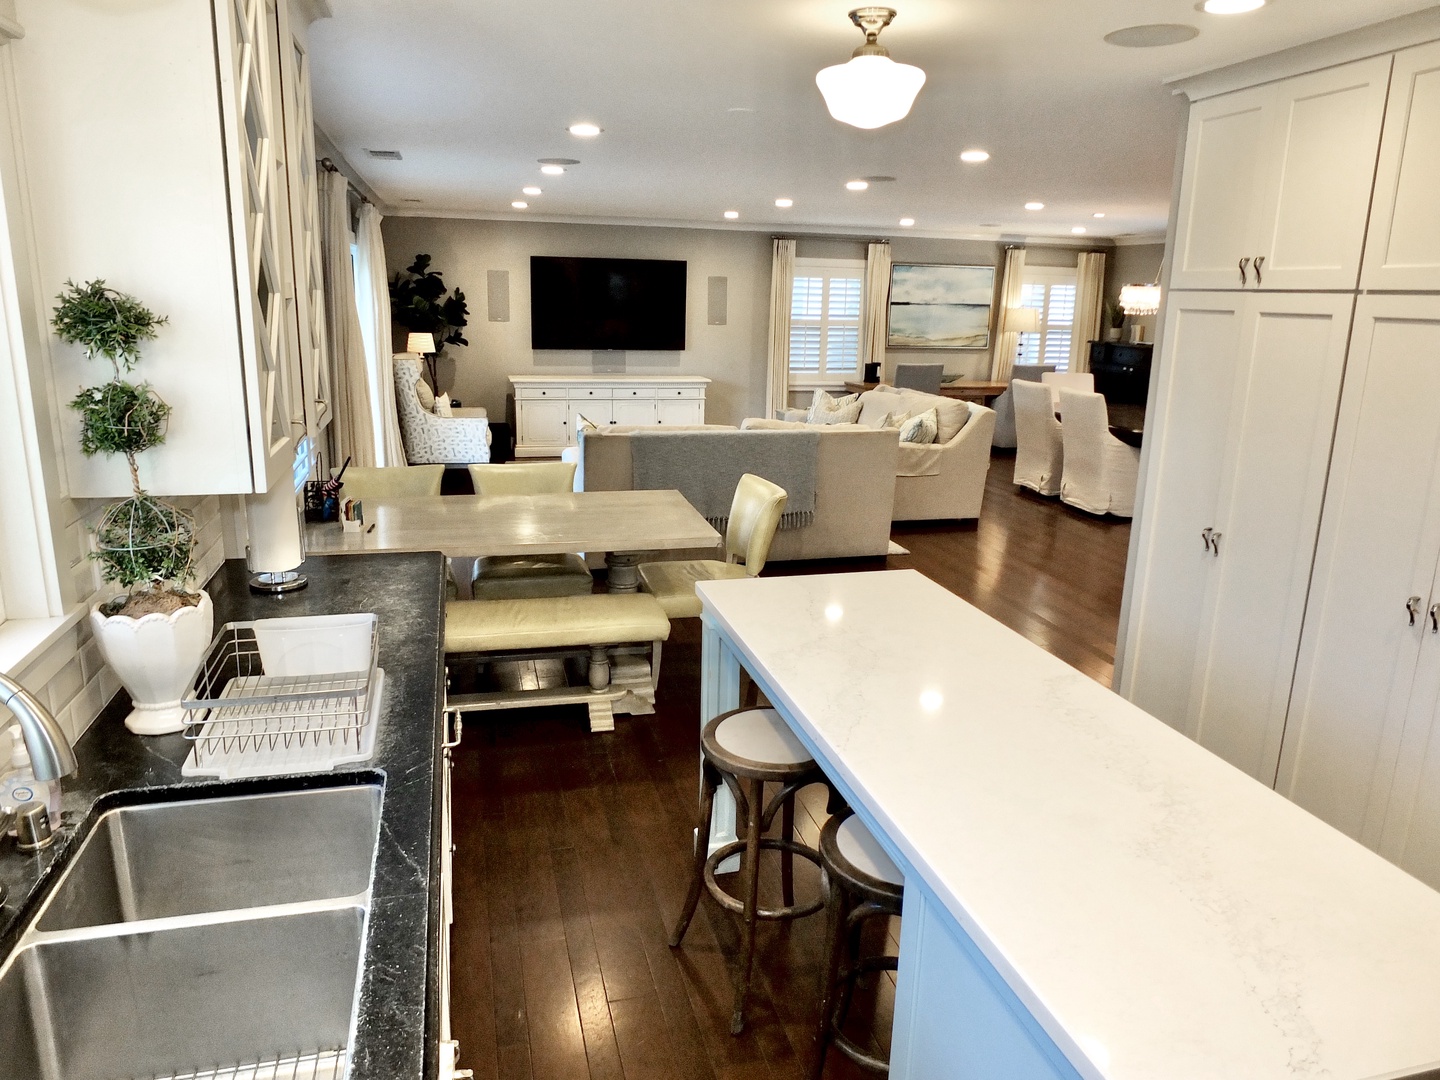 The chic kitchen is a chef’s dream, providing all the comforts of home